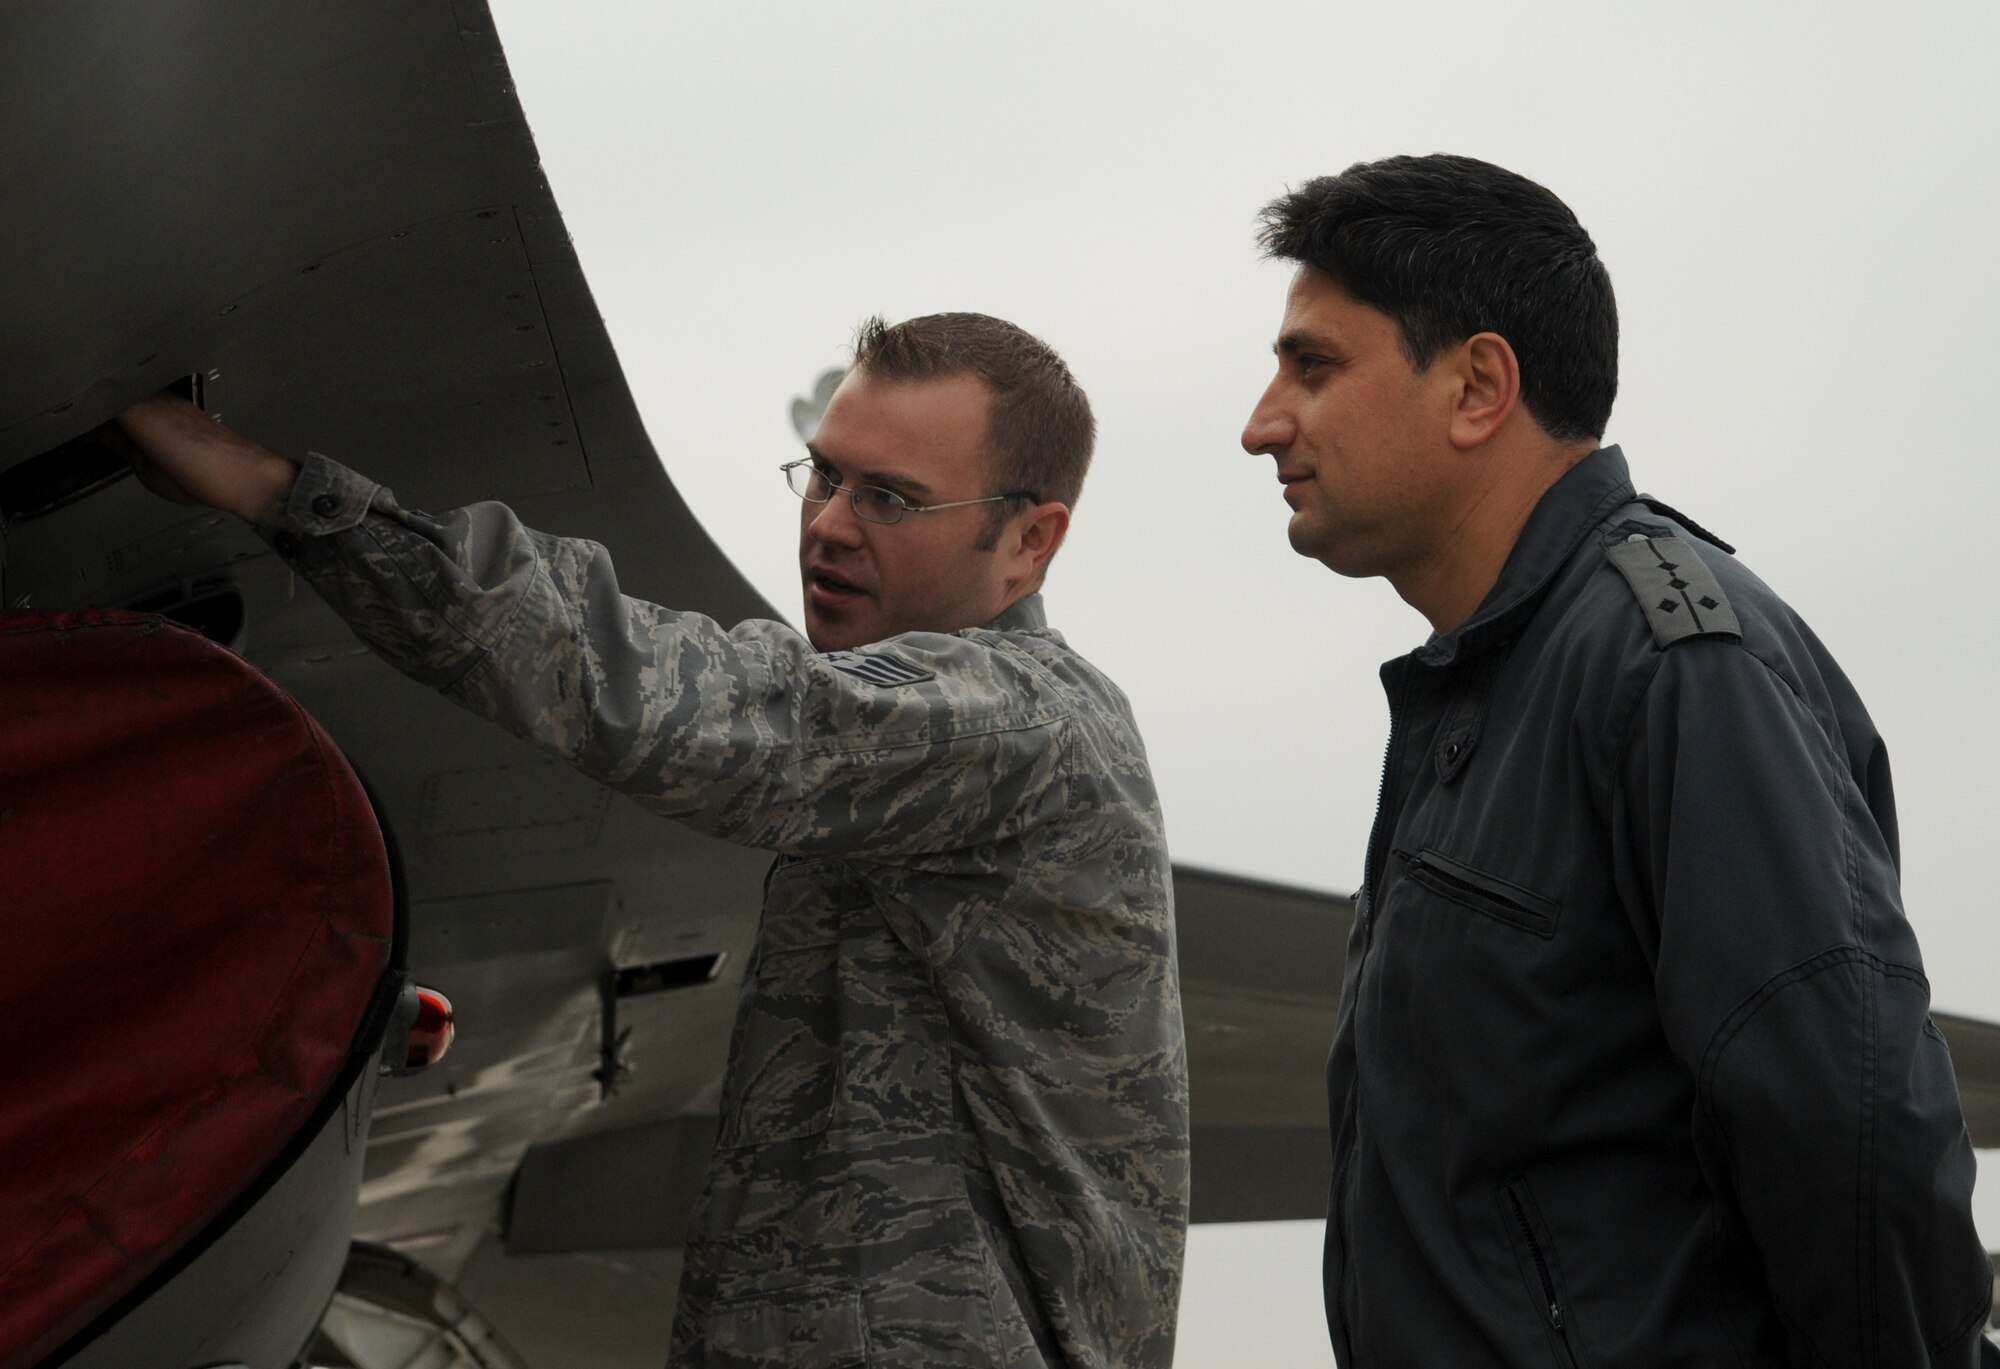 GRAF IGNATIEVO AIR FORCE BASE, Bulgaria - Staff Sgt. Joshua Adcock, 52 Aircraft Maintenance Squadron avionics systems journeyman, explains the avionic components of an F-16 Fighting Falcon to his Bulgarian air force counterpart, Capt. Pavlin Novakov, during Operation Thracian Star Oct. 13. During the exercise, members of the 52nd AMXS shared knowledge and experience with six Bulgarian maintainers about weapons, electronics, avionics and engine maintenance. (U.S. Air Force photo/Staff Sgt. Benjamin Wilson)